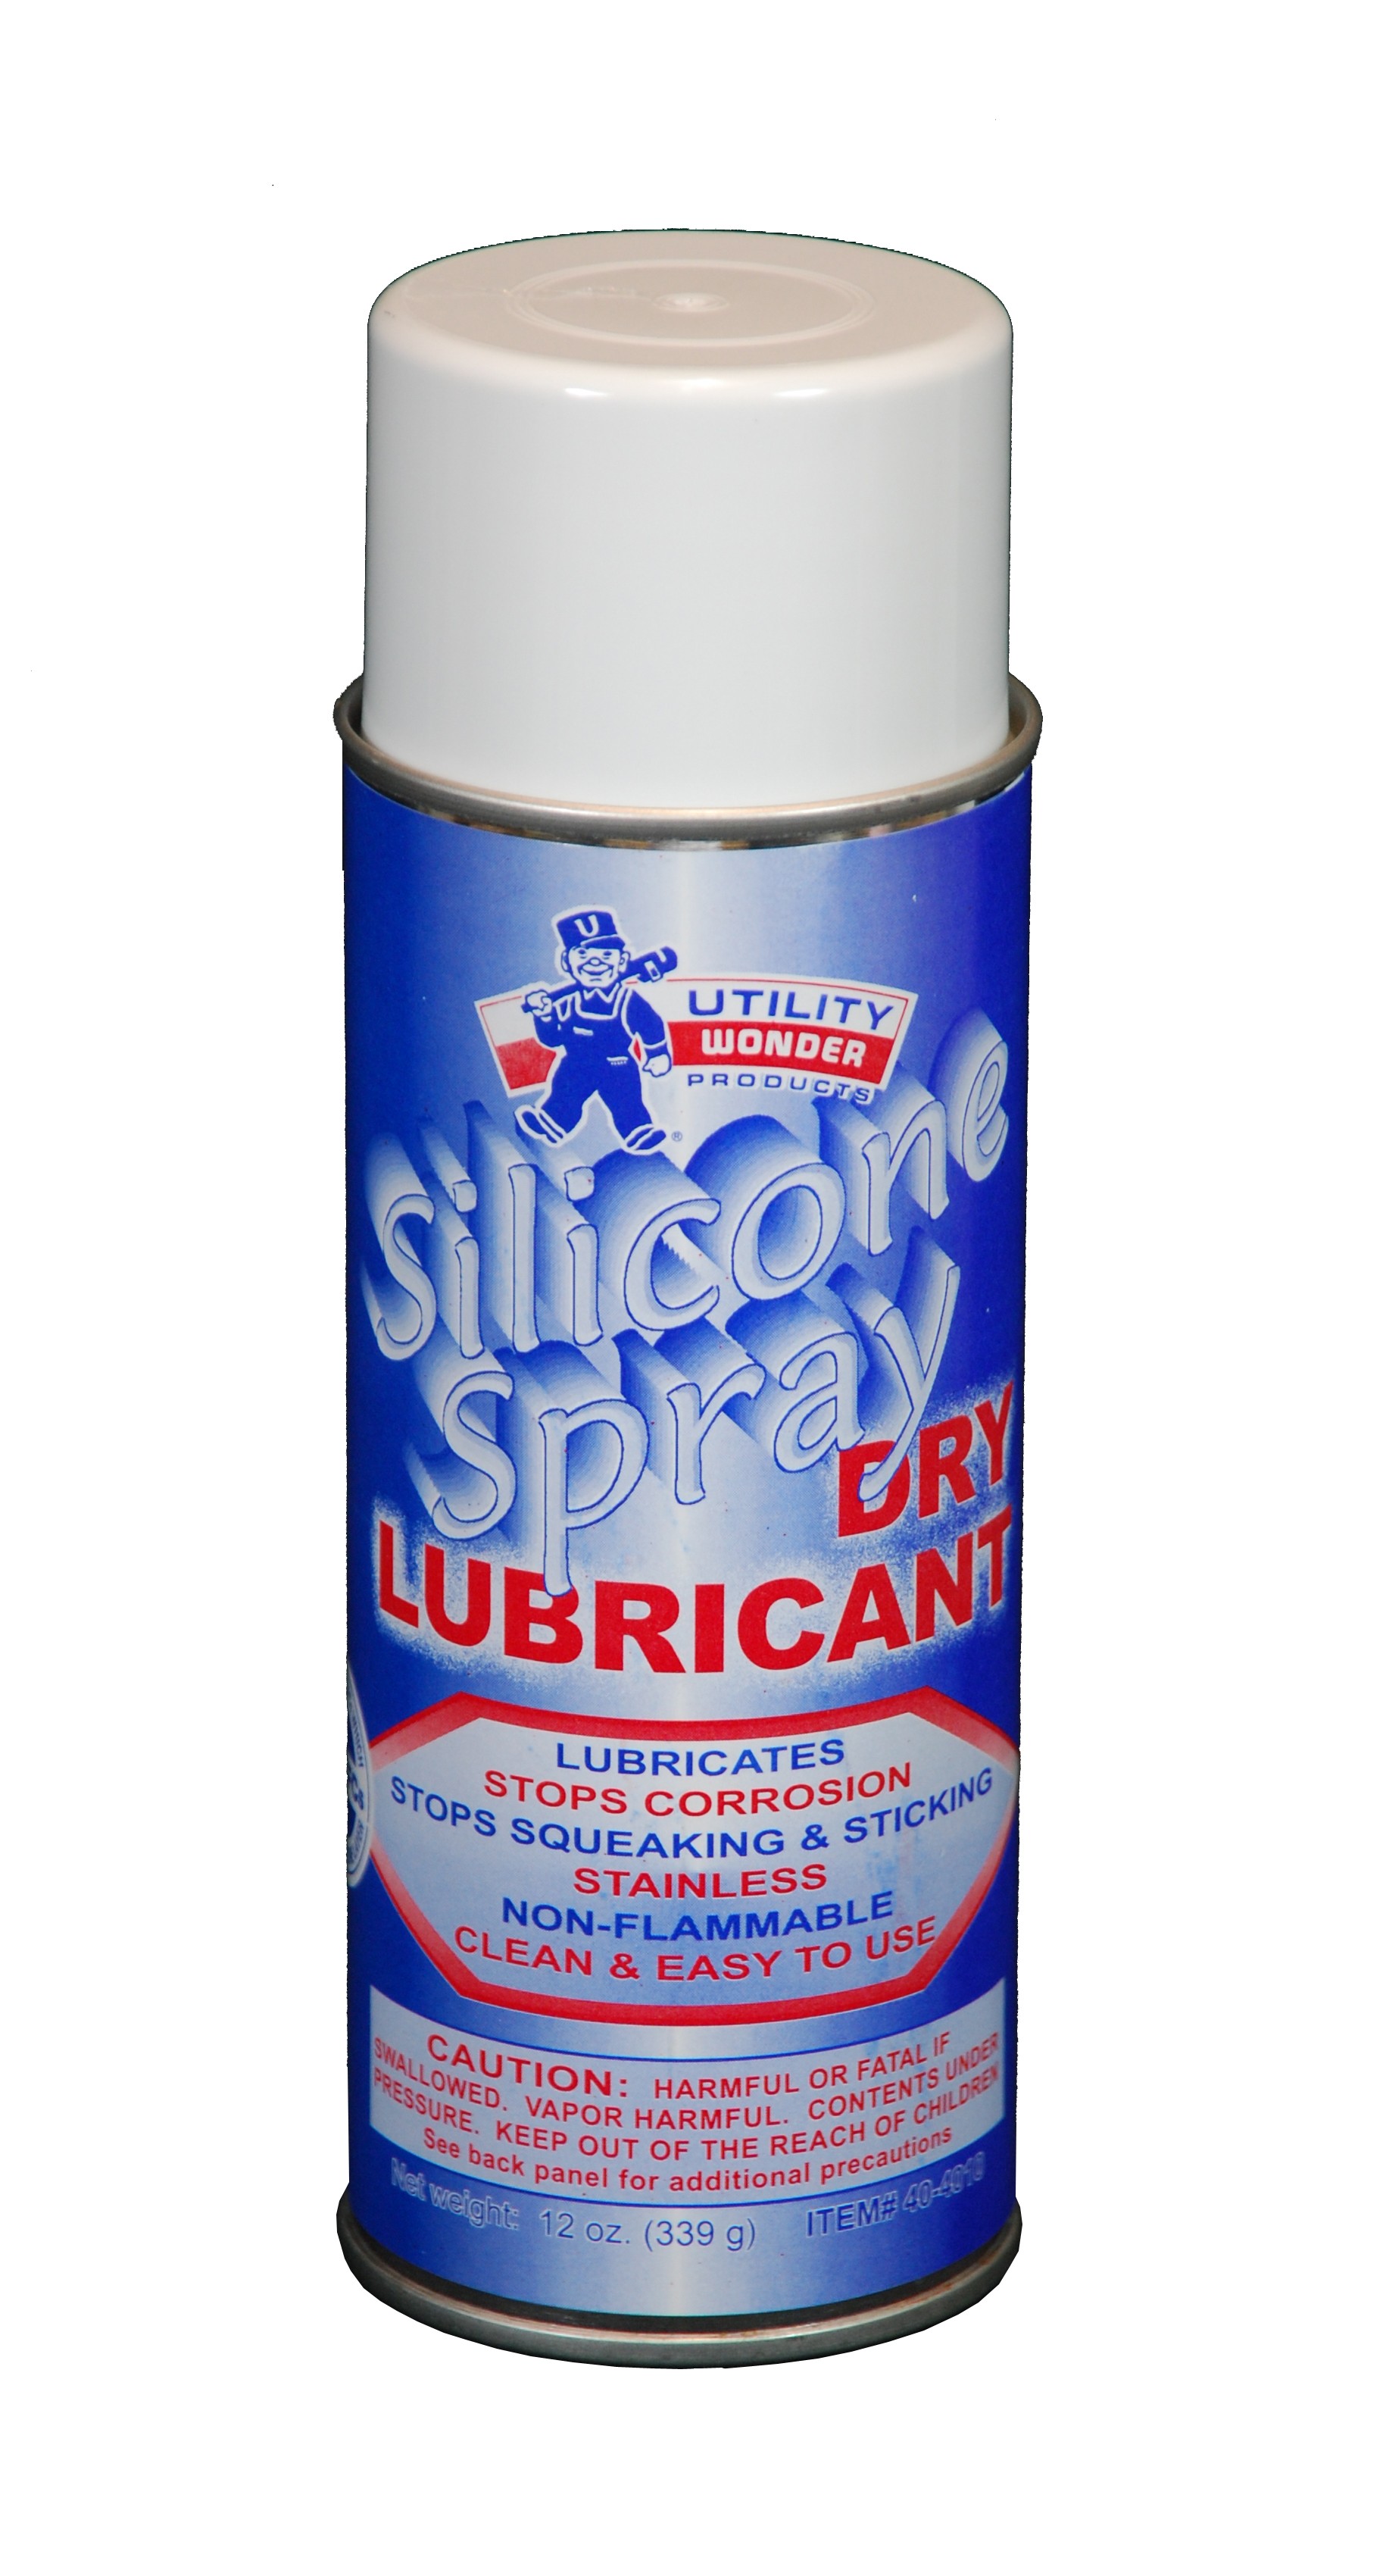 SILICONE SPRAY DRY LUBRICANT - Plumbing